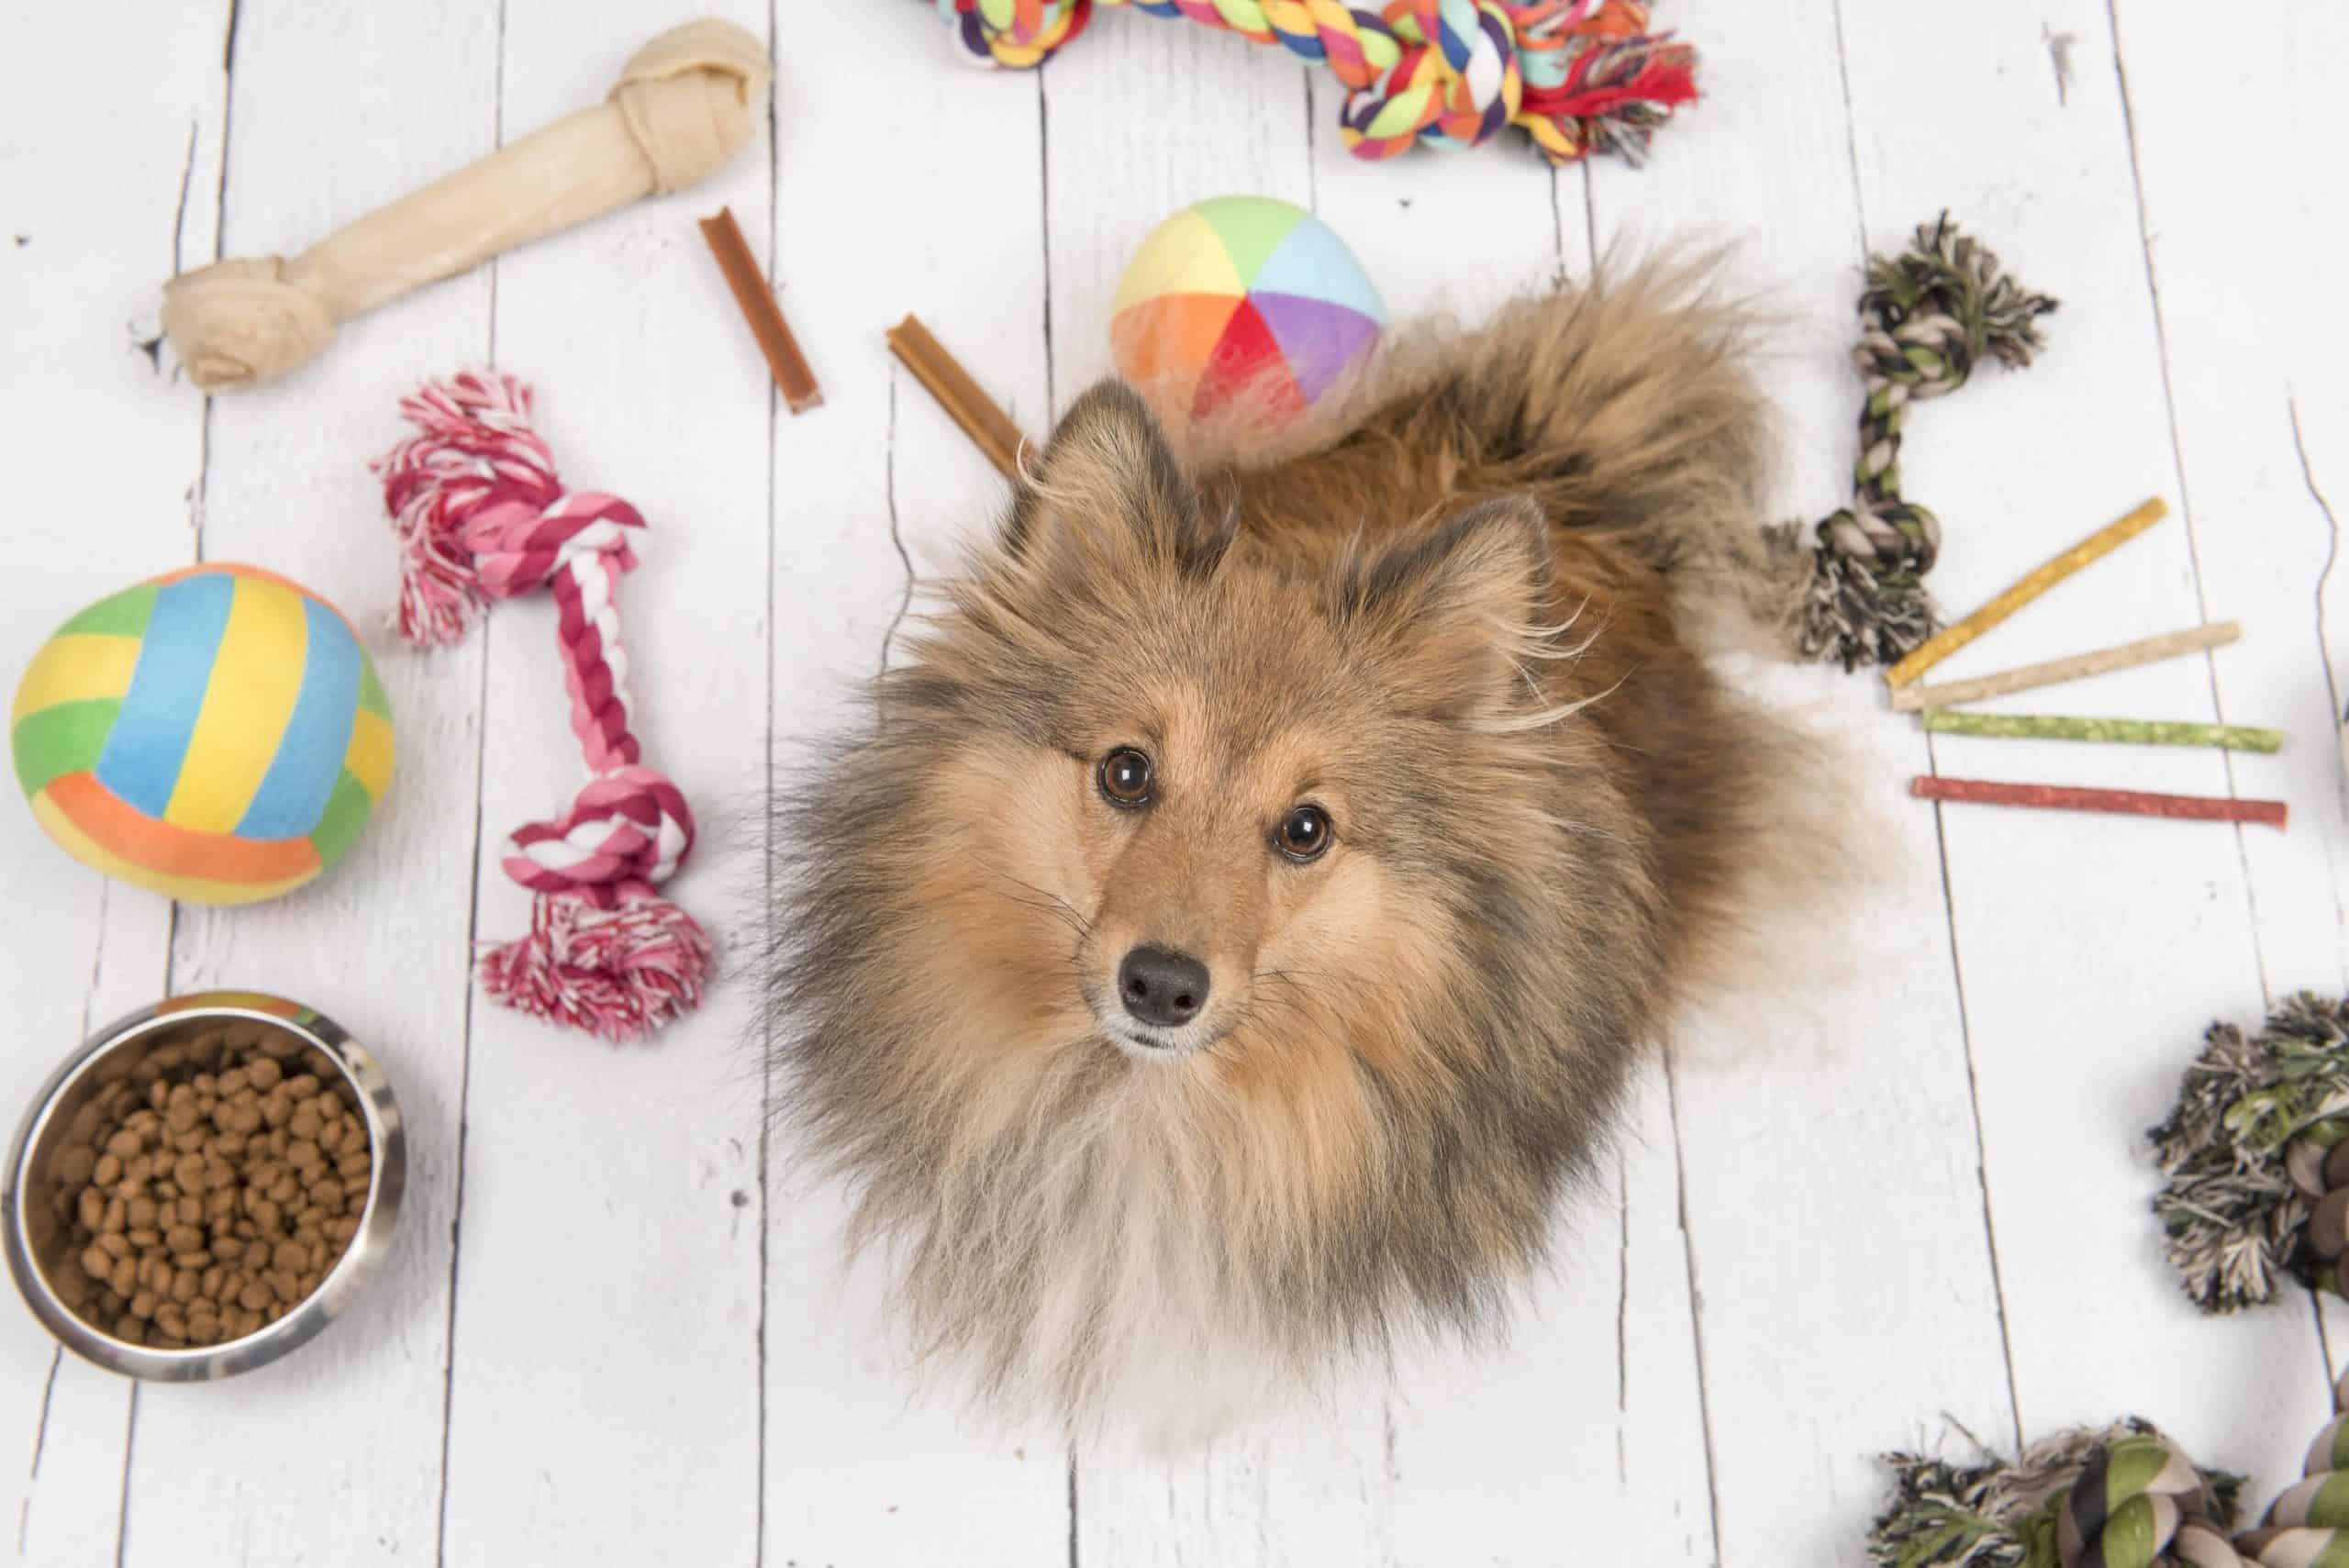 Sheltie sits on white floor surrounded by dog supplies.